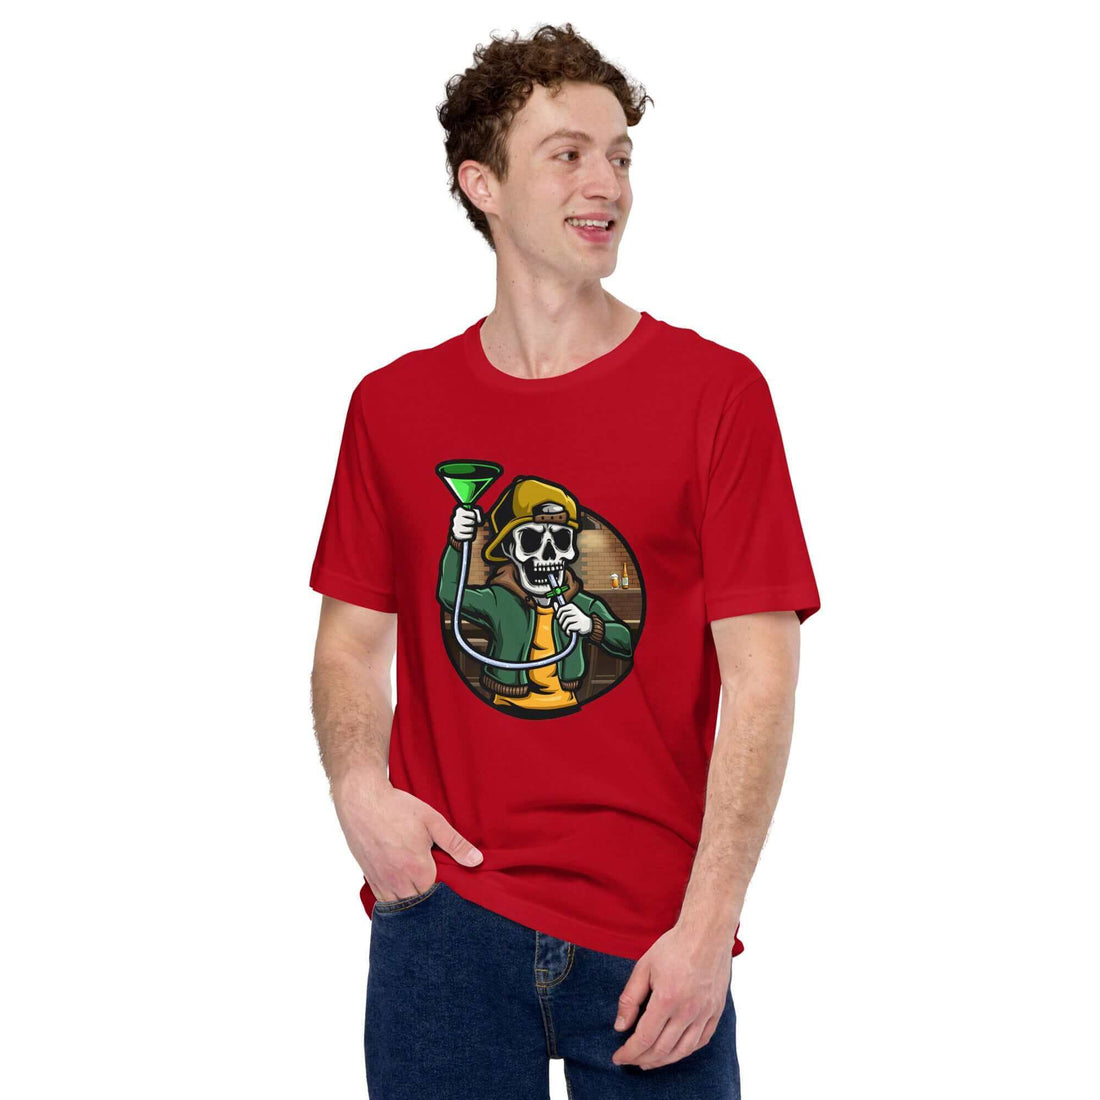 Beer Bong All Night - Unisex t-shirt - Red